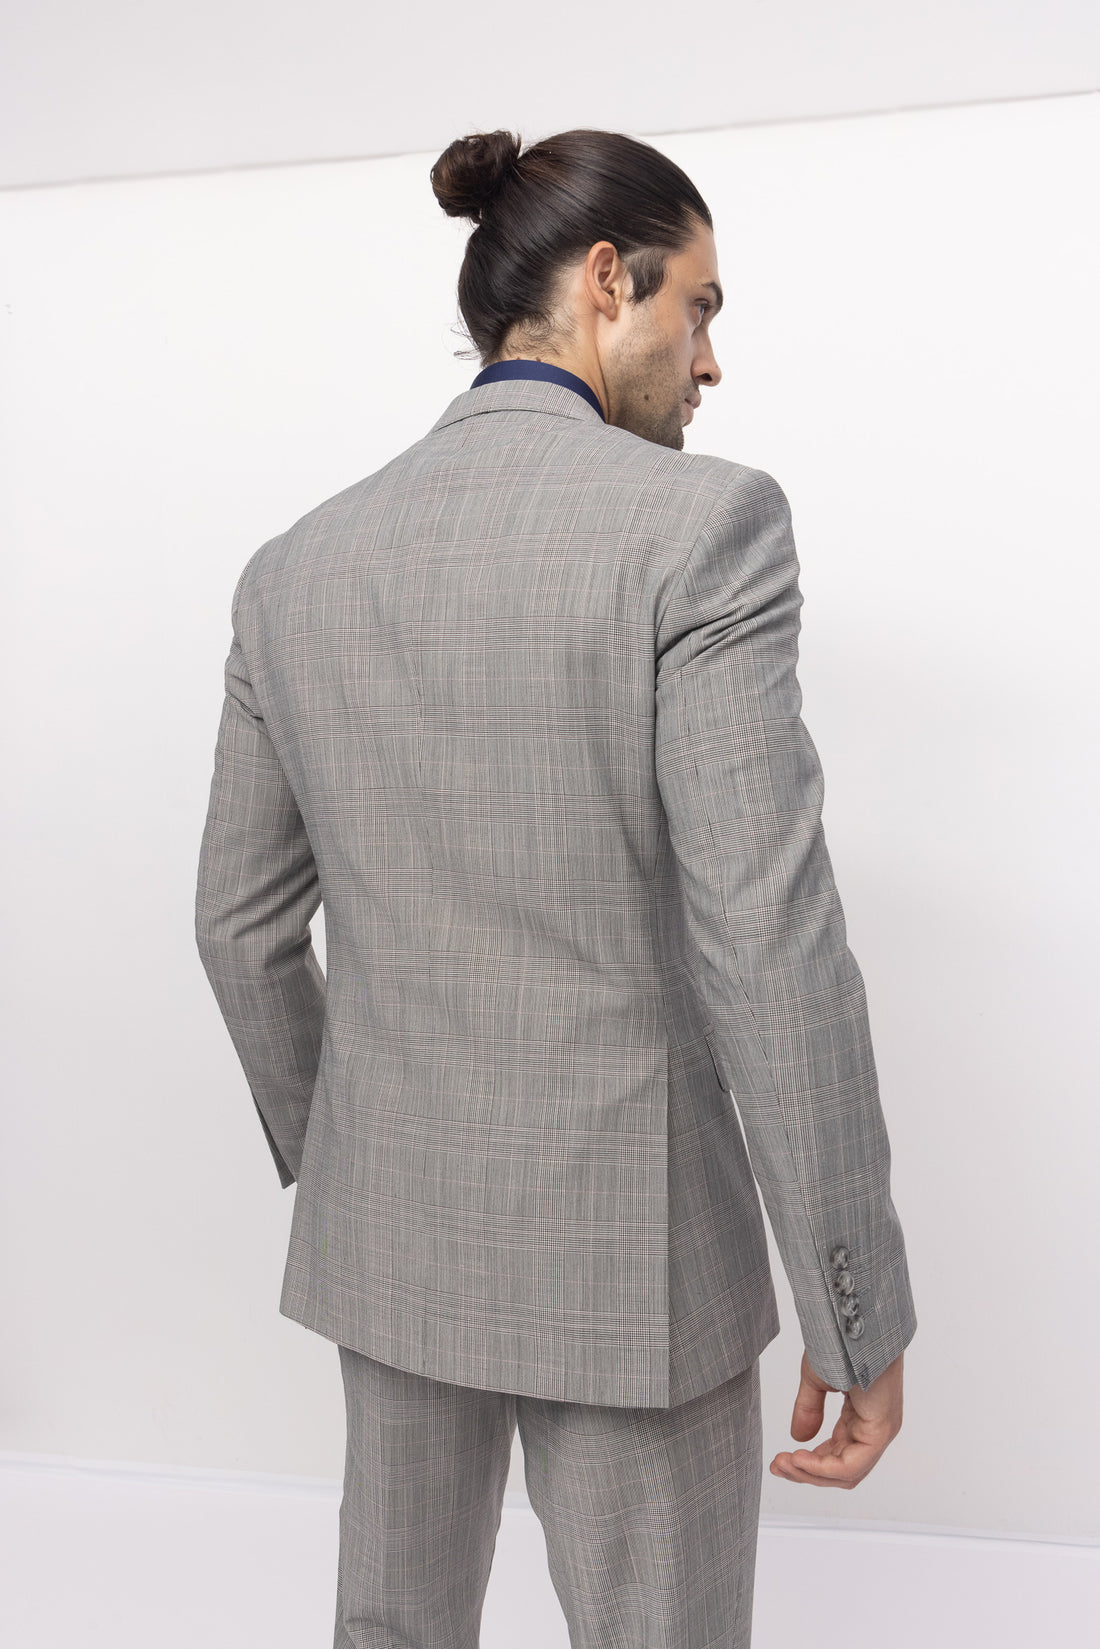 R206 - Double Breasted Suit - Black Plaid - Ron Tomson